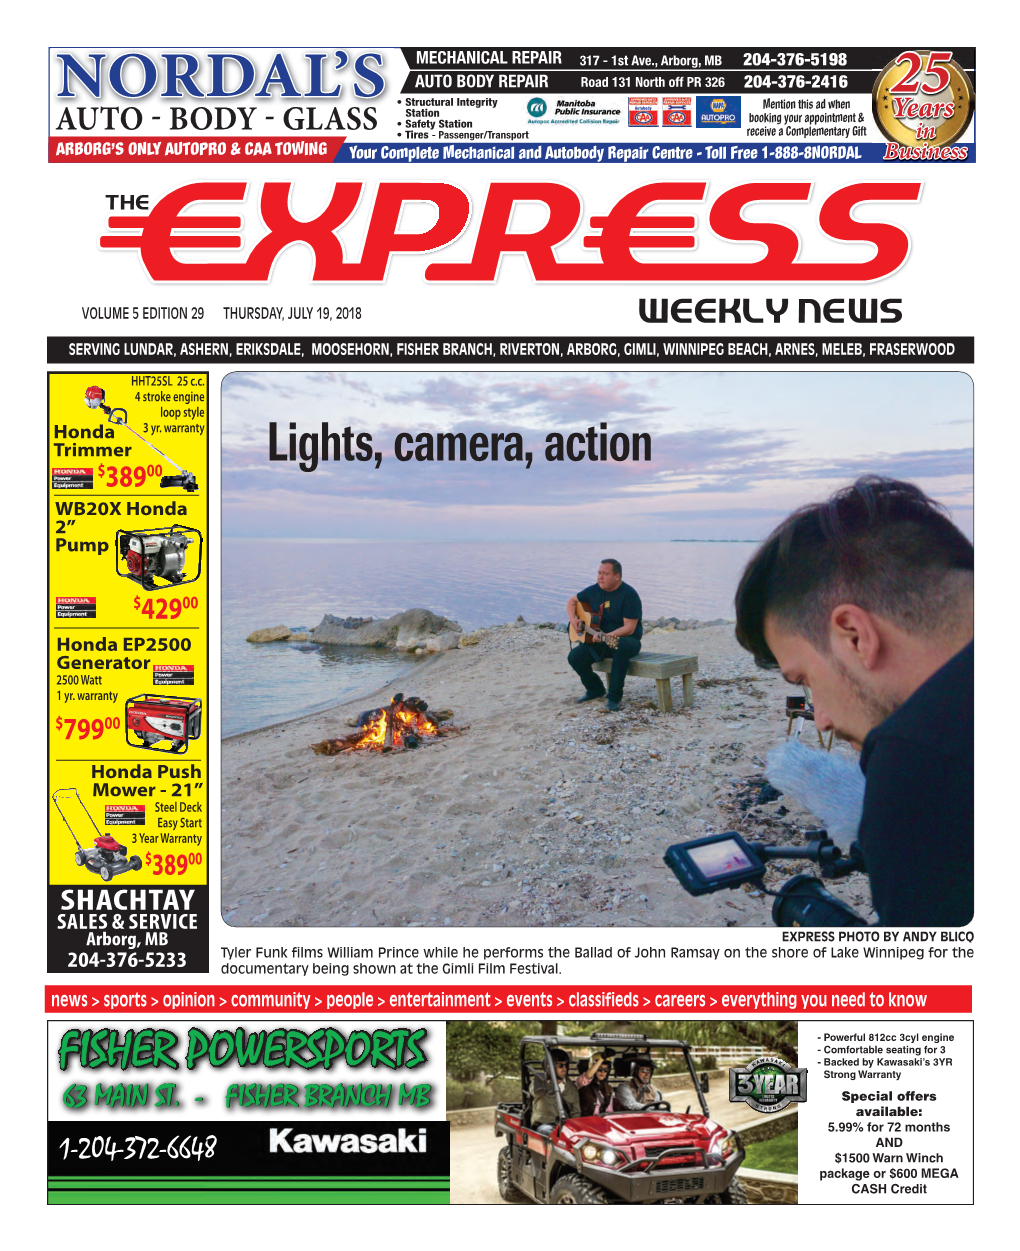 Proofed-Express Weekly News 071918.Indd